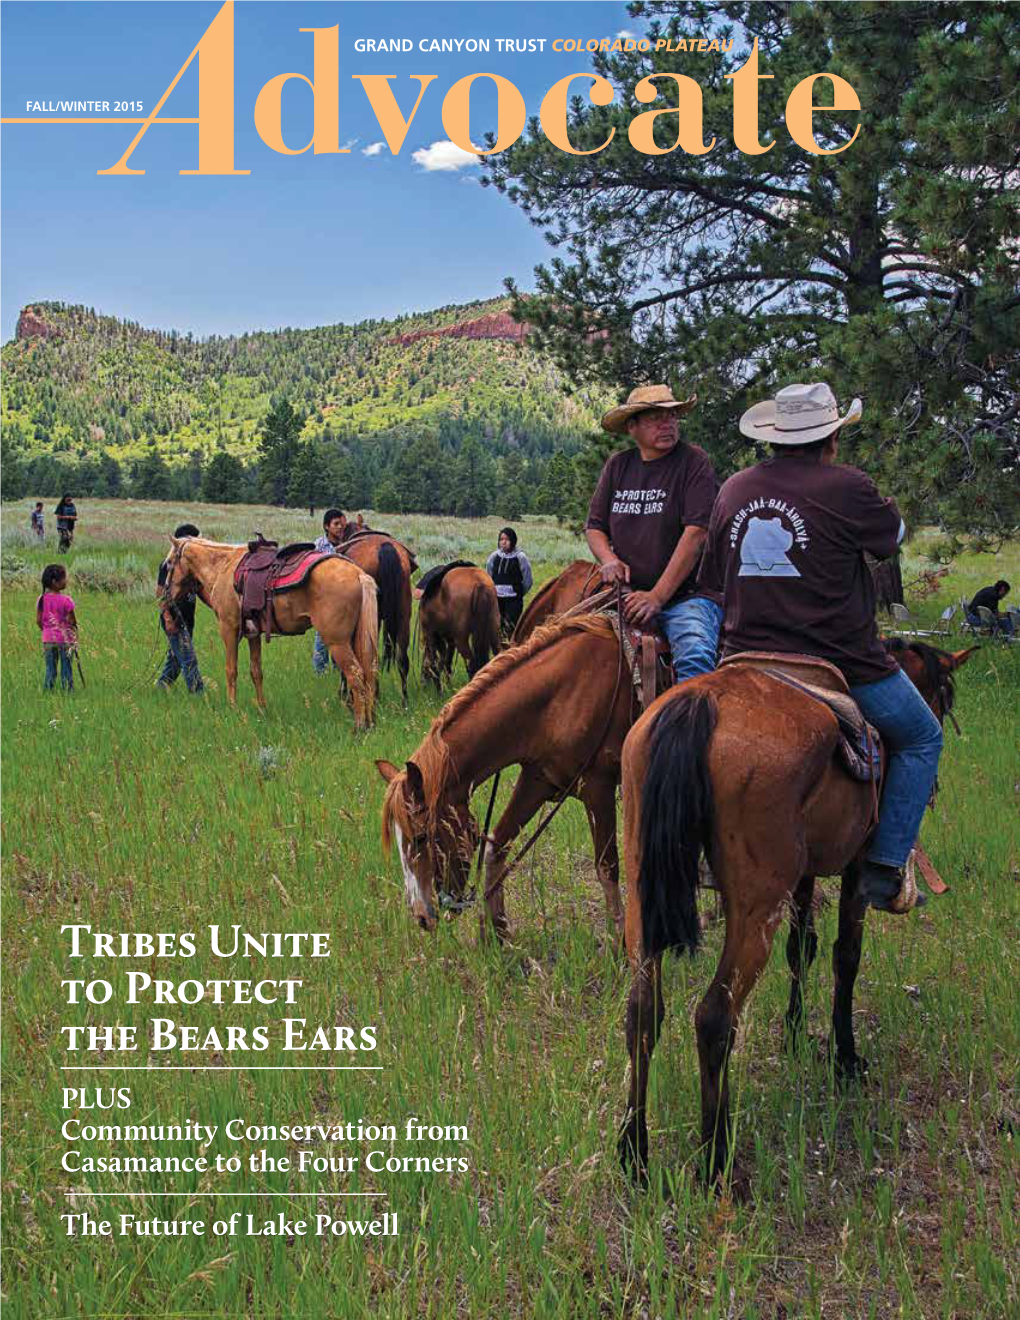 Tribes Unite to Protect the Bears Ears PLUS Community Conservation from Casamance to the Four Corners